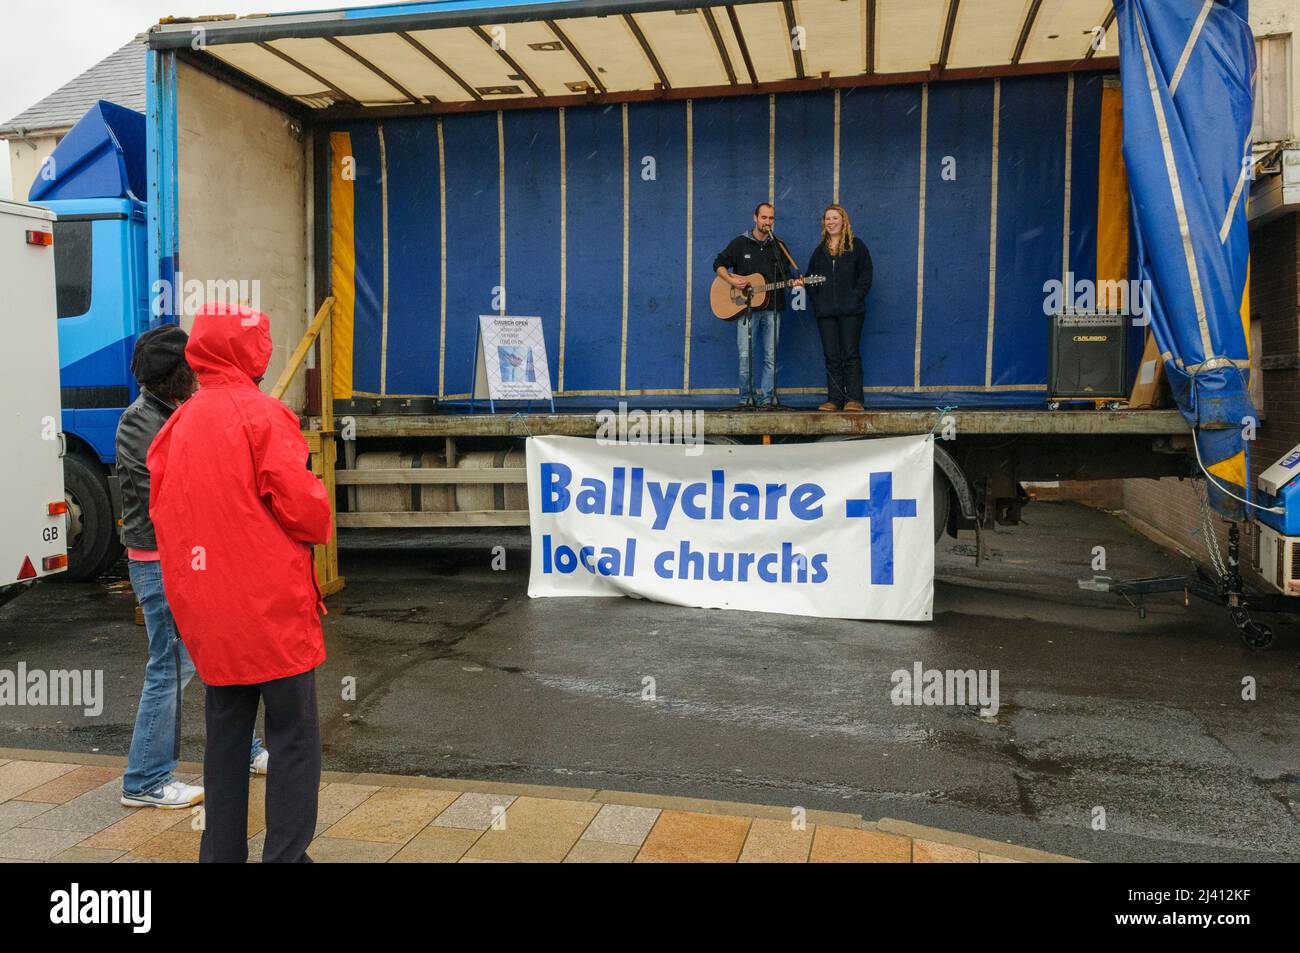 Ballyclare, Northern Ireland. 21st May 2011.  Two people watch a singer and guitarist perform on the back of a lorry with a mis-spelled sign saying 'Ballyclare local churchs [sic]' Stock Photo